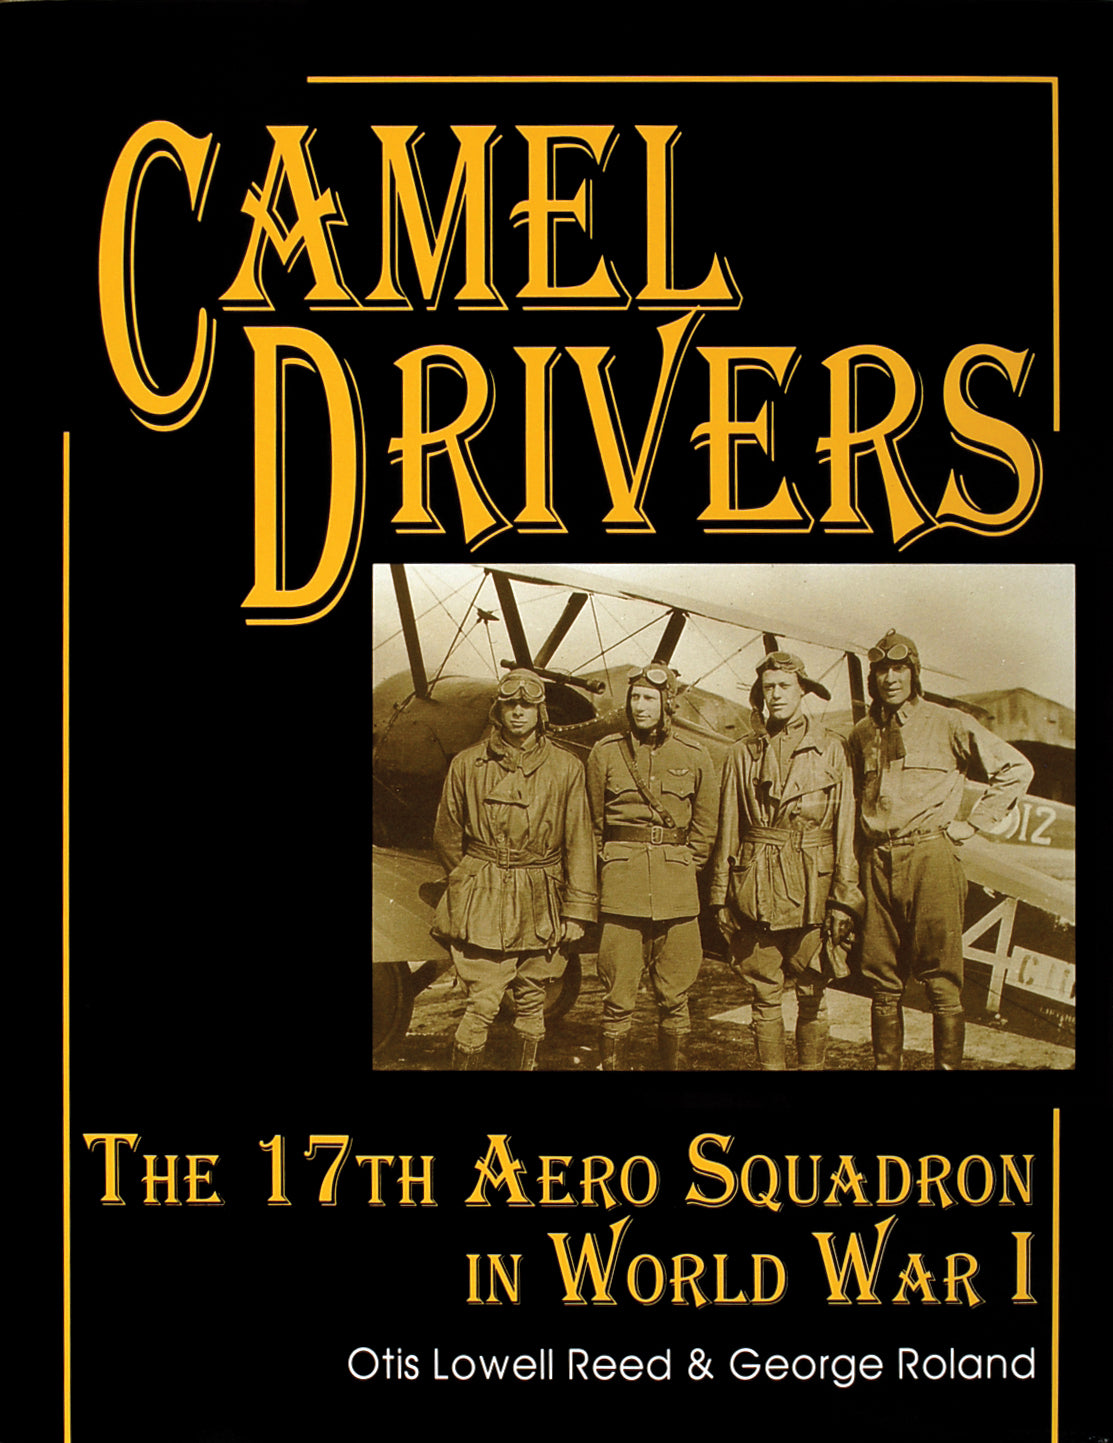 The Camel Drivers